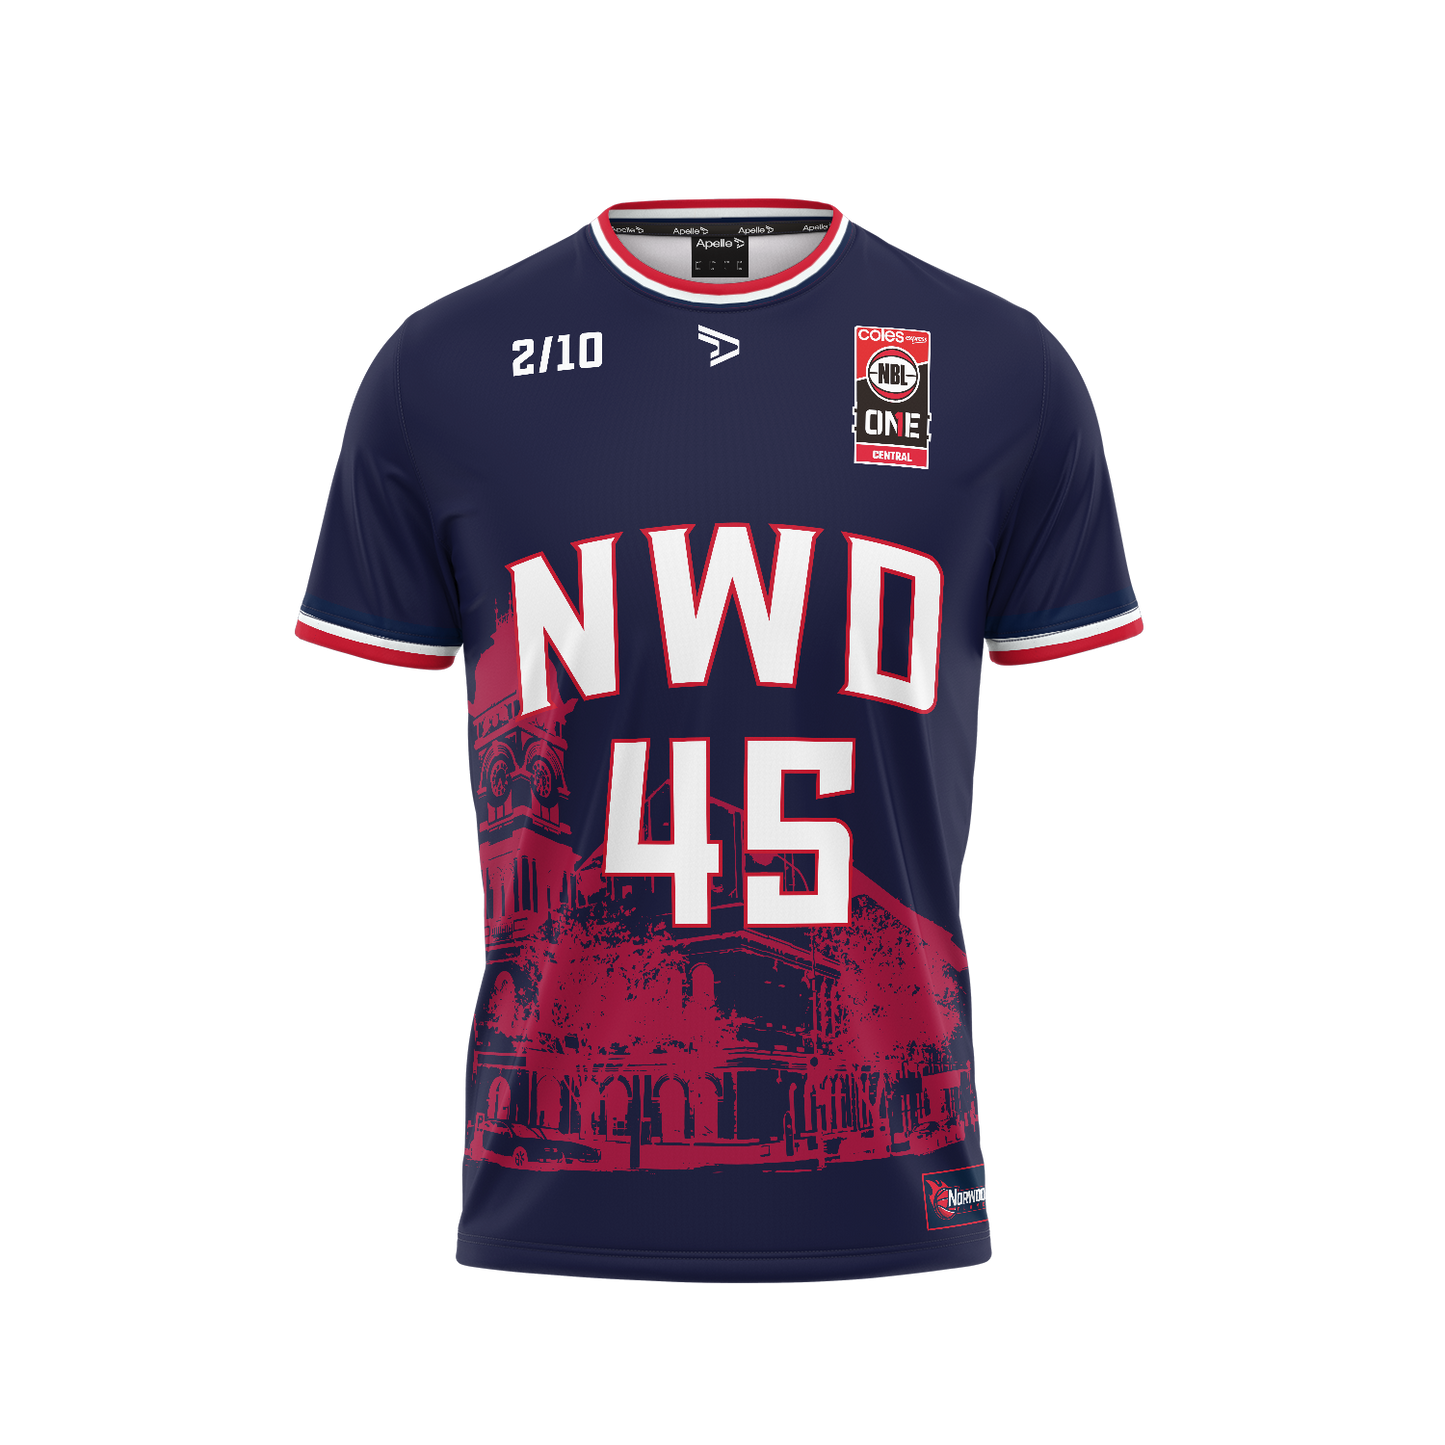 NORWOOD FLAMES SUPPORTER TEE - NAVY with Printed Number